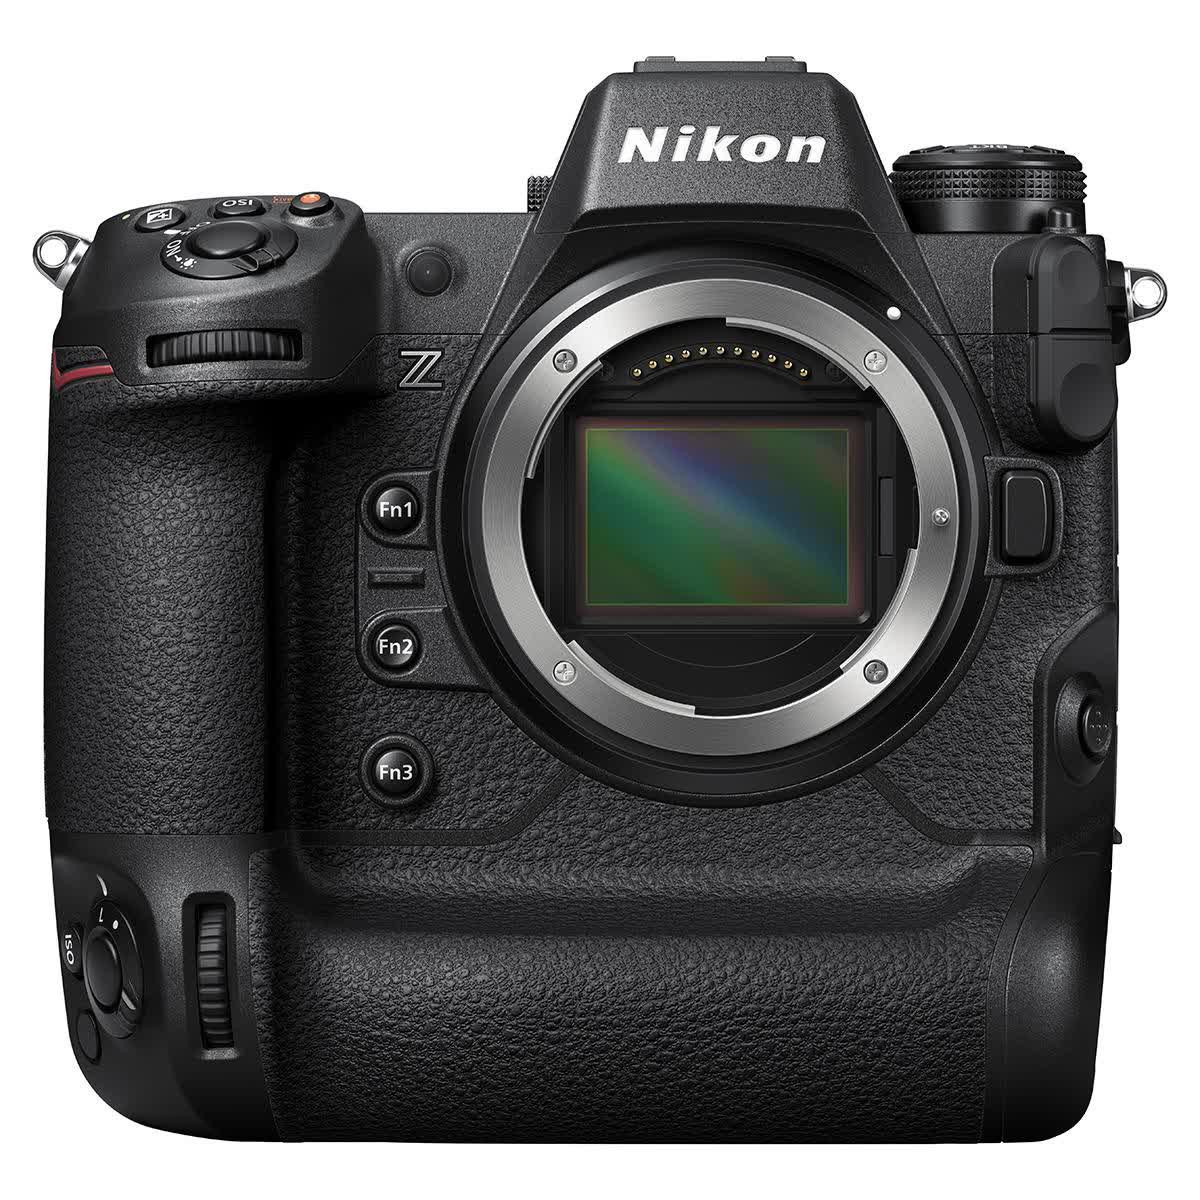 Nikon unwraps the Z 9, a full-frame mirrorless shooter with 45.7MP sensor capable of 8K, 120FPS videos